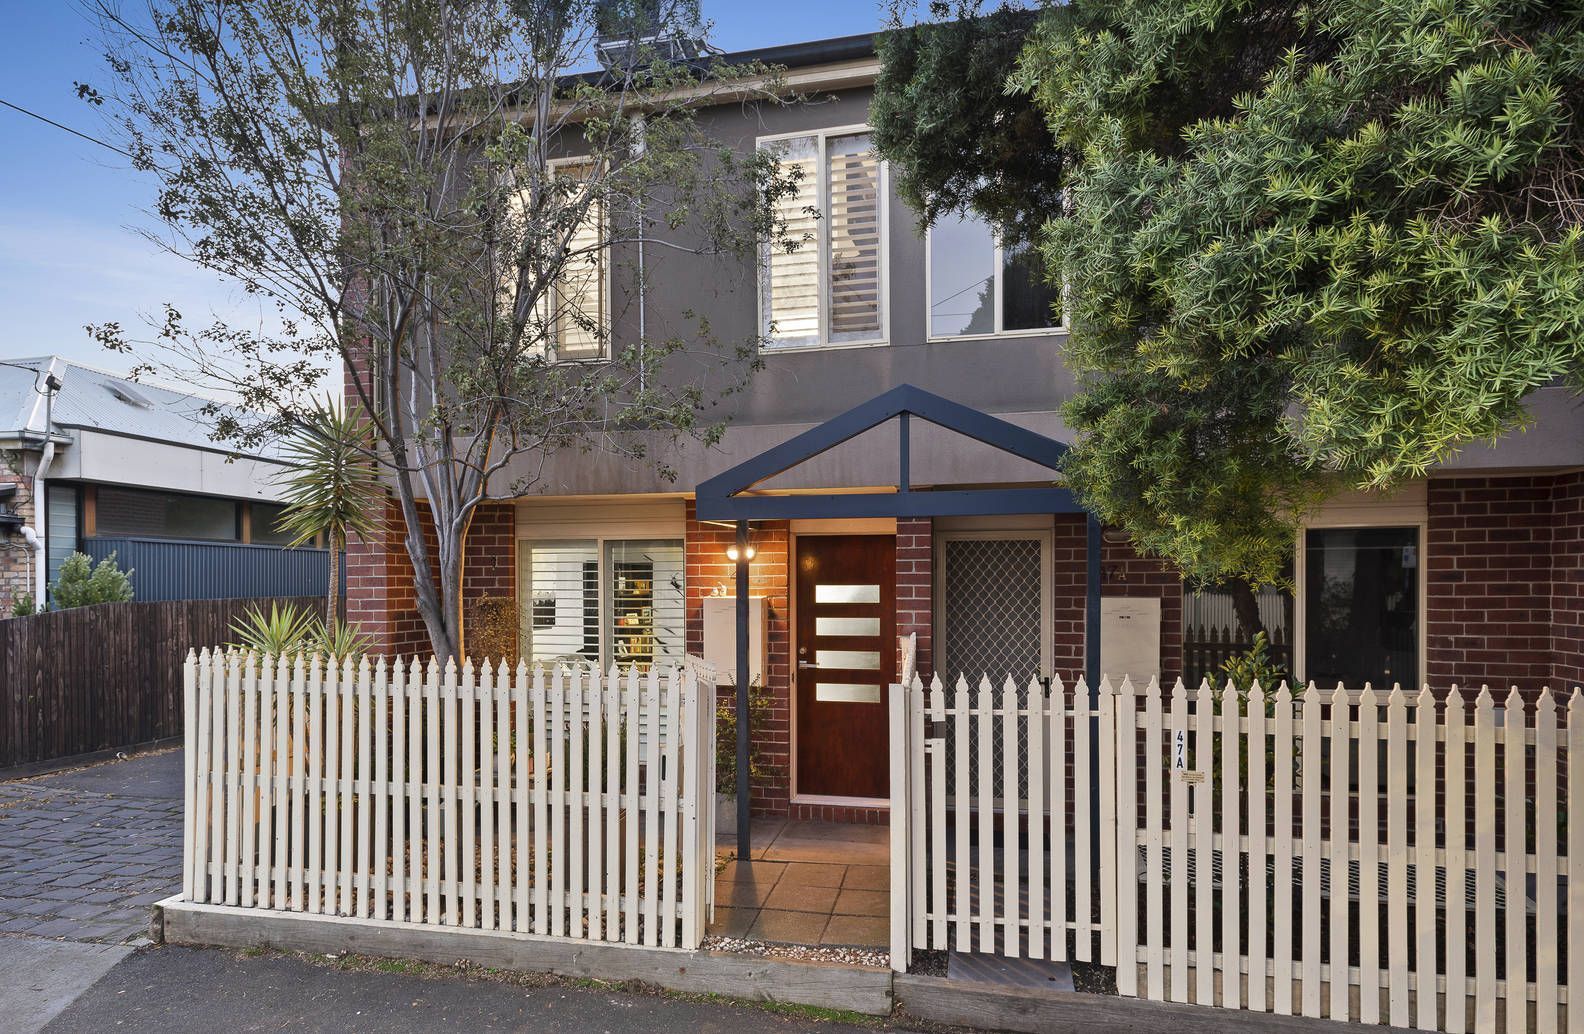 The Melbourne house that's $119,000 cheaper than its near-identical neighbour